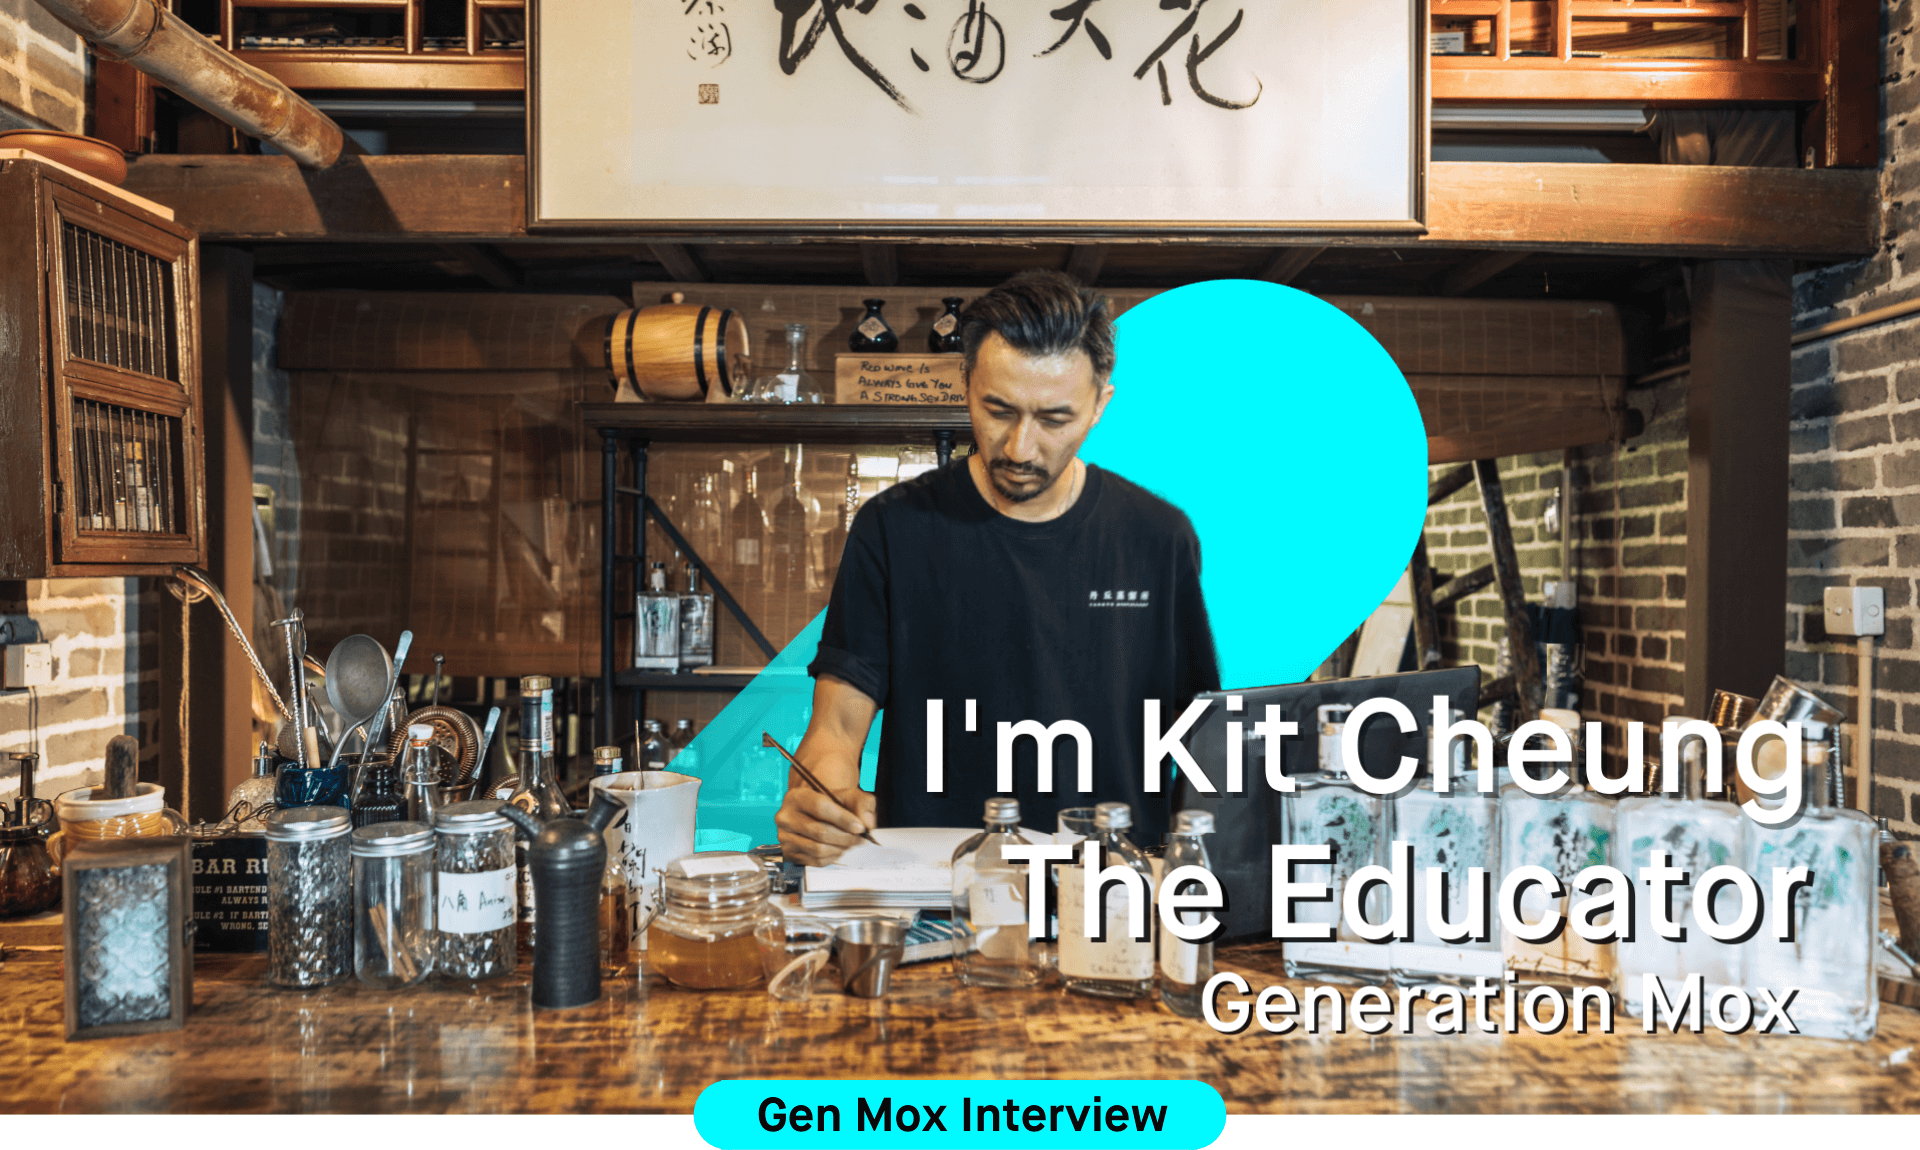 Gen Mox Interview: 10 Questions with Kit Cheung, Founder of Perfume Trees Gin